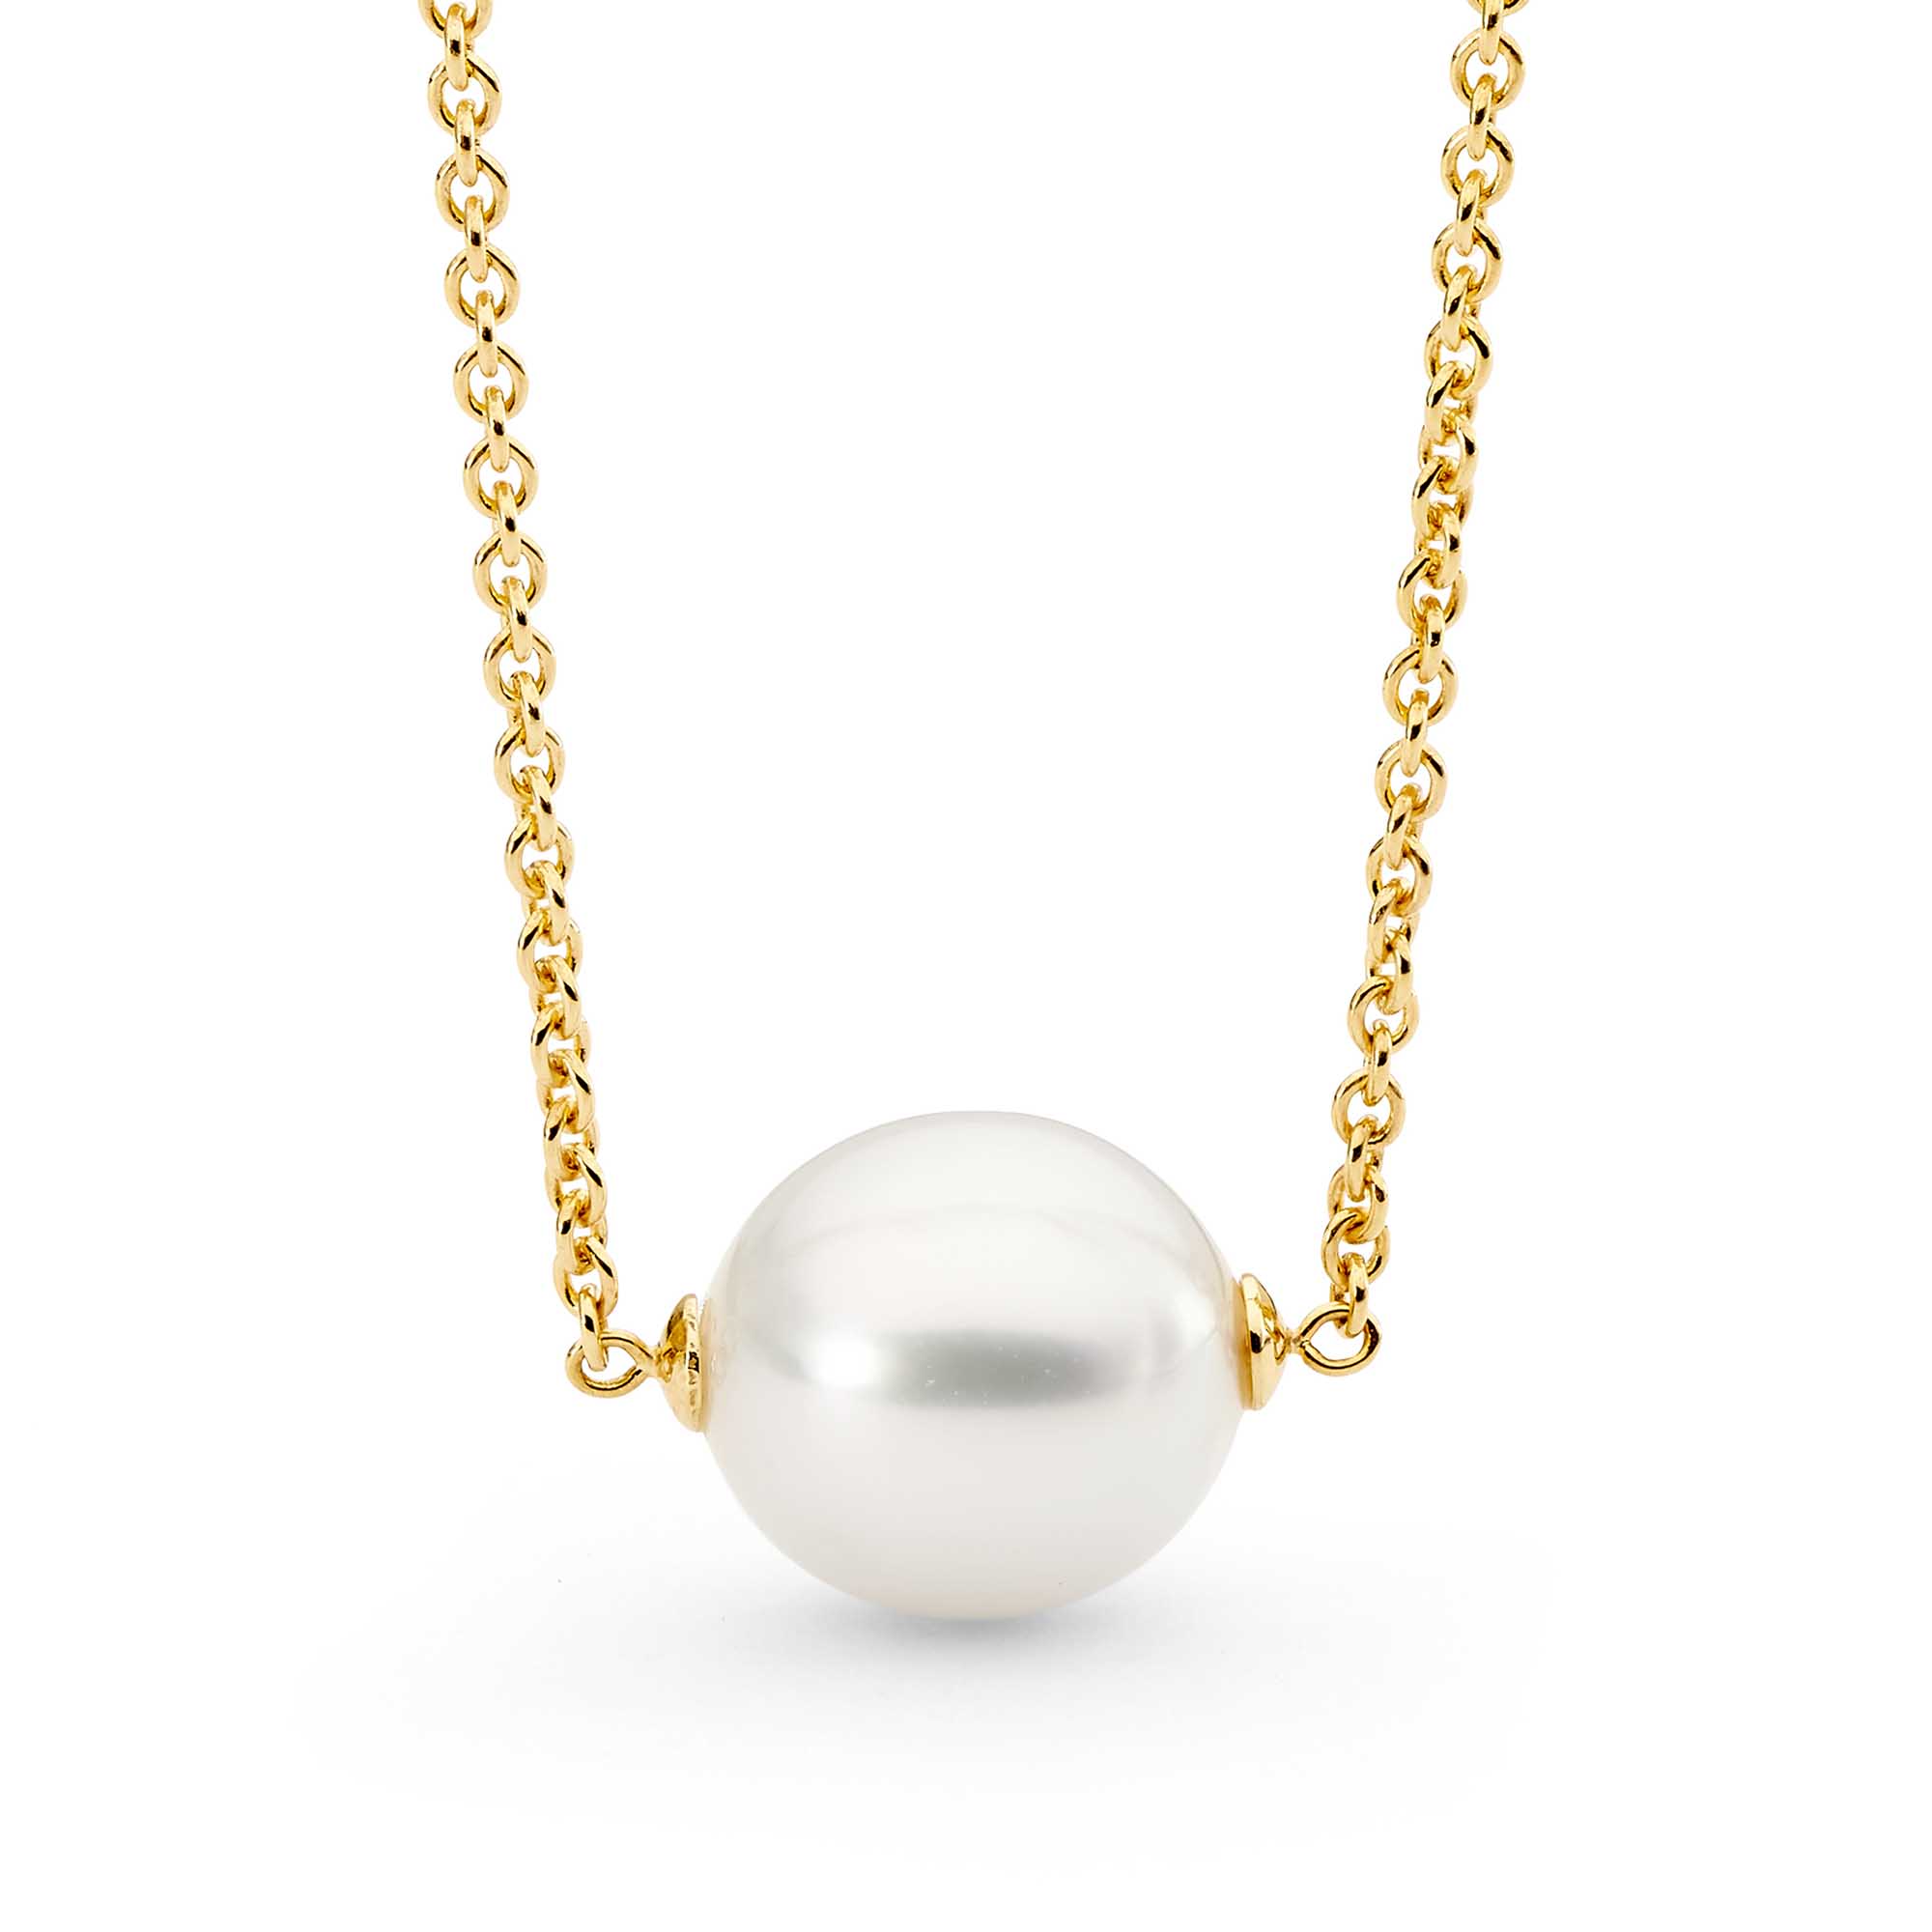 Allure Floating Pearl Necklace | Perth Mint jewellery